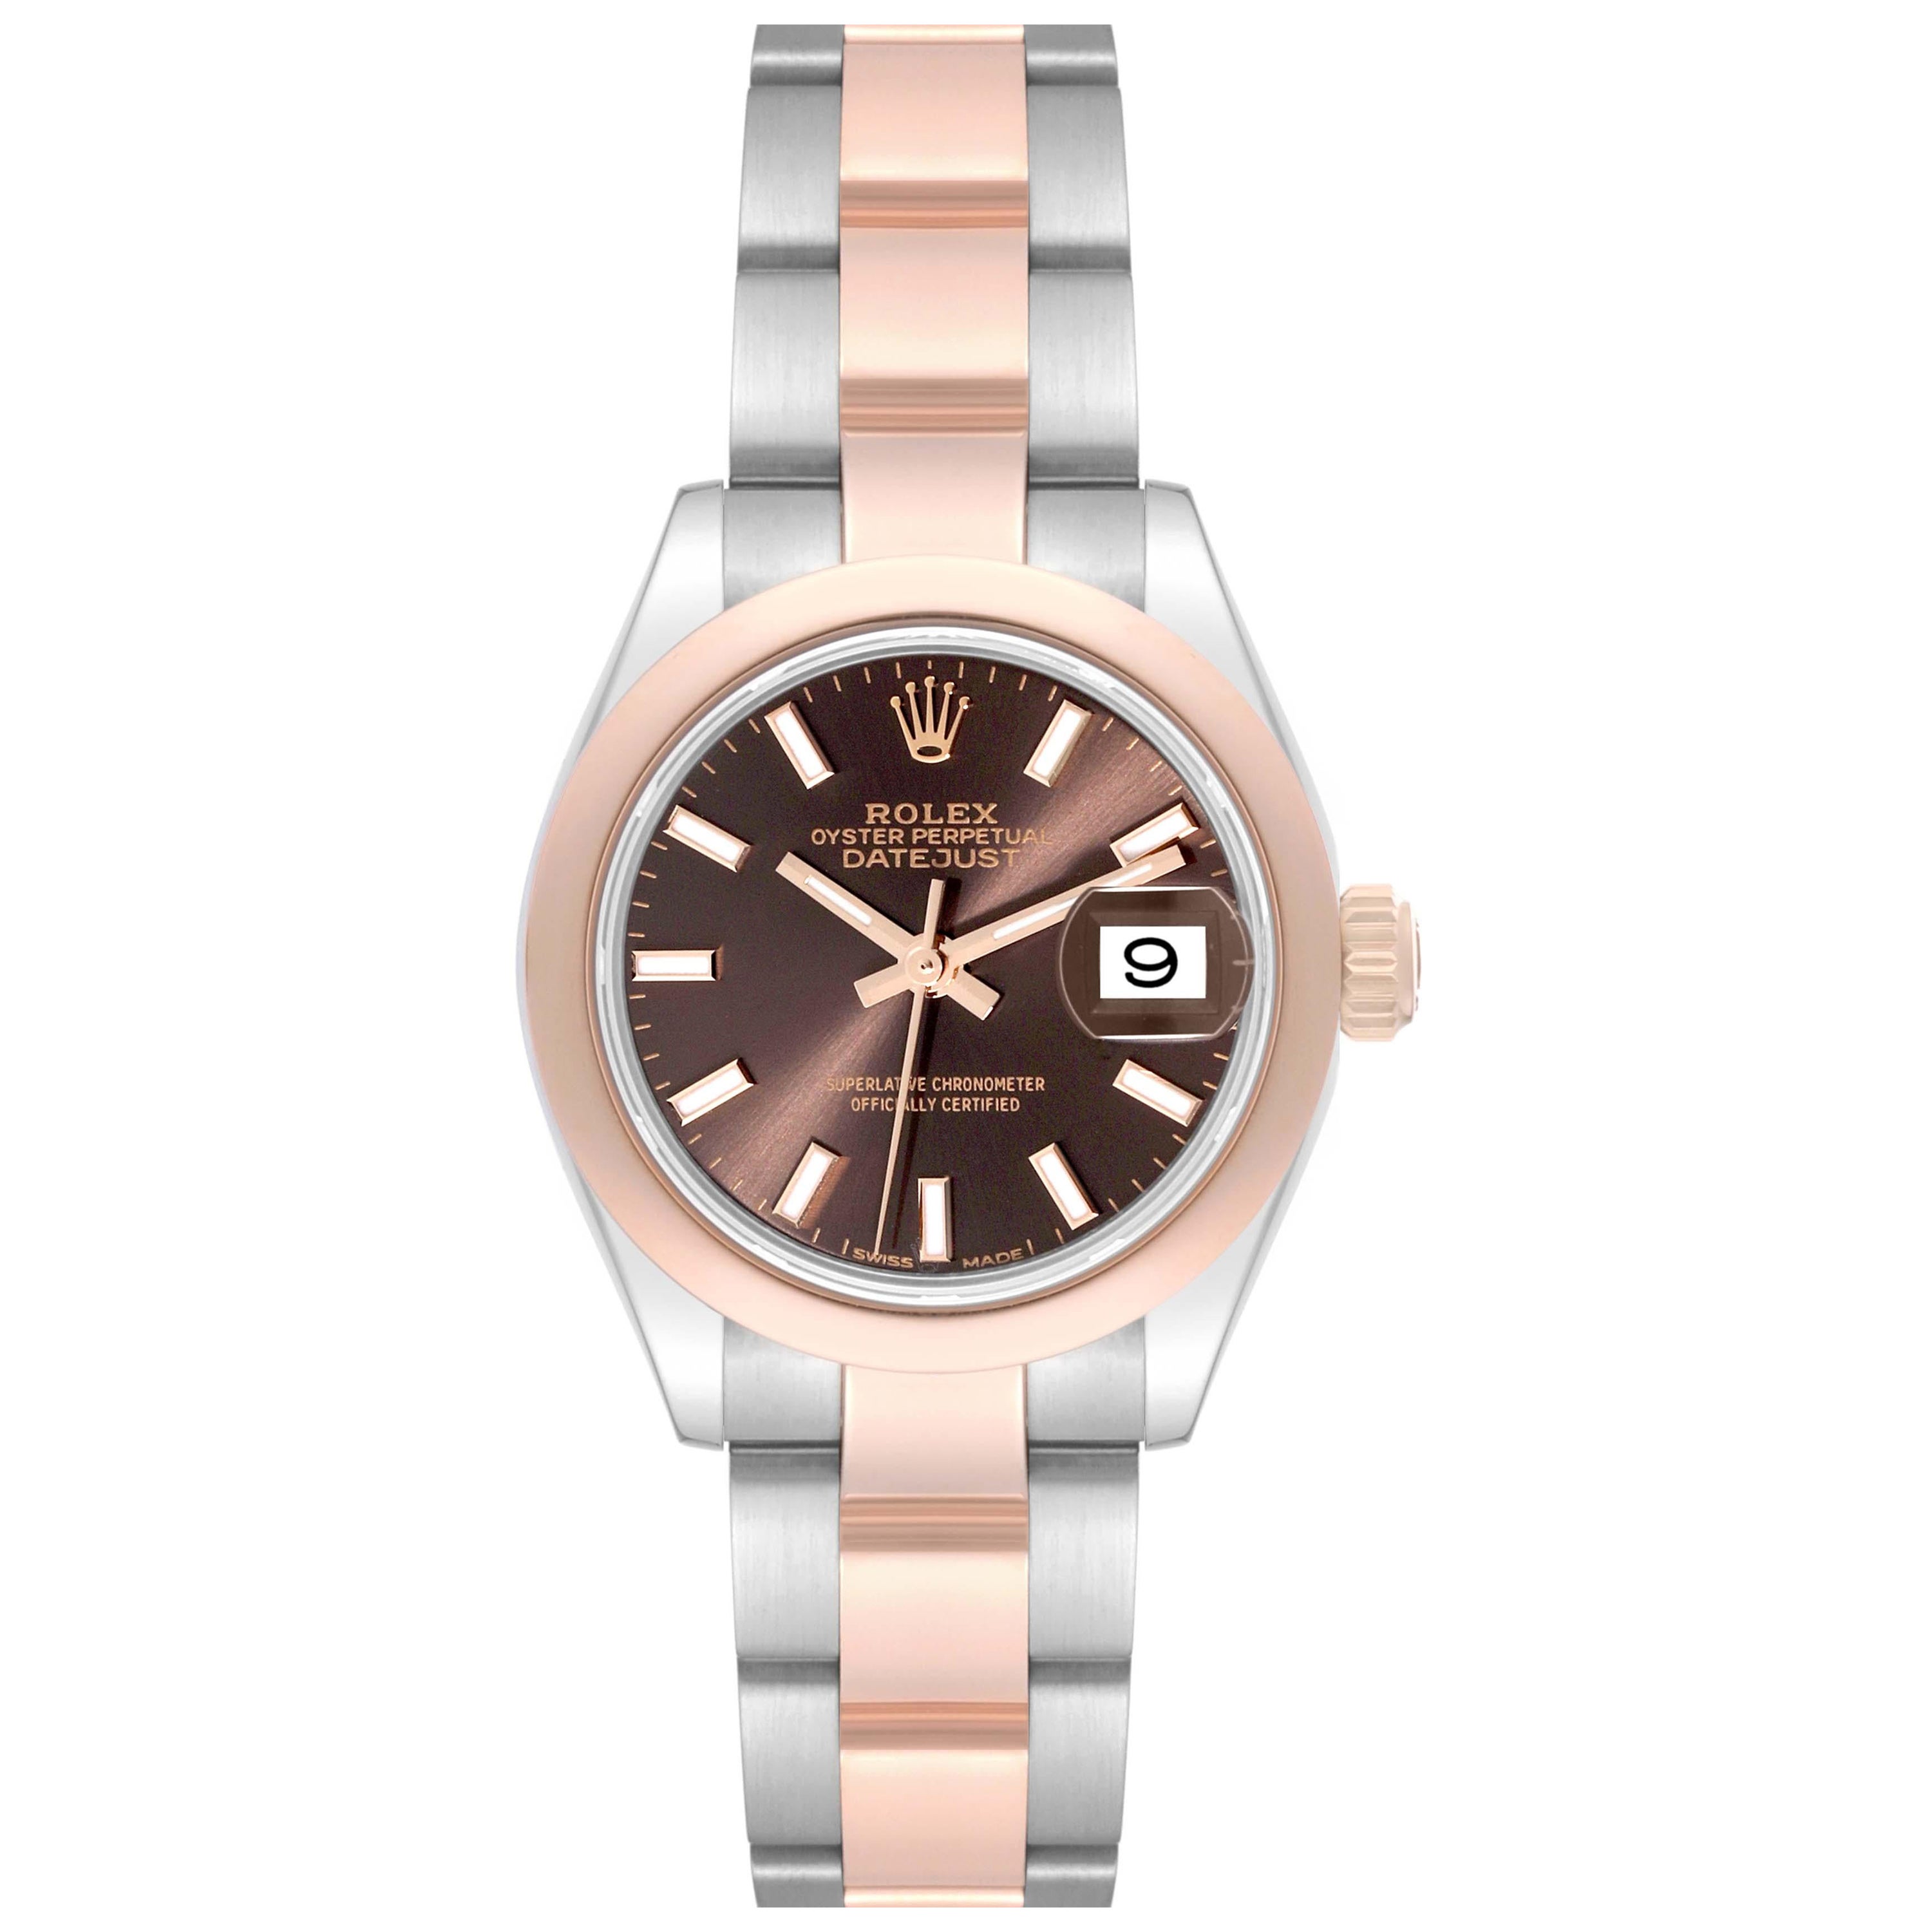 Rolex Datejust Steel Rose Gold Brown Dial Ladies Watch 279161 Box Card For Sale